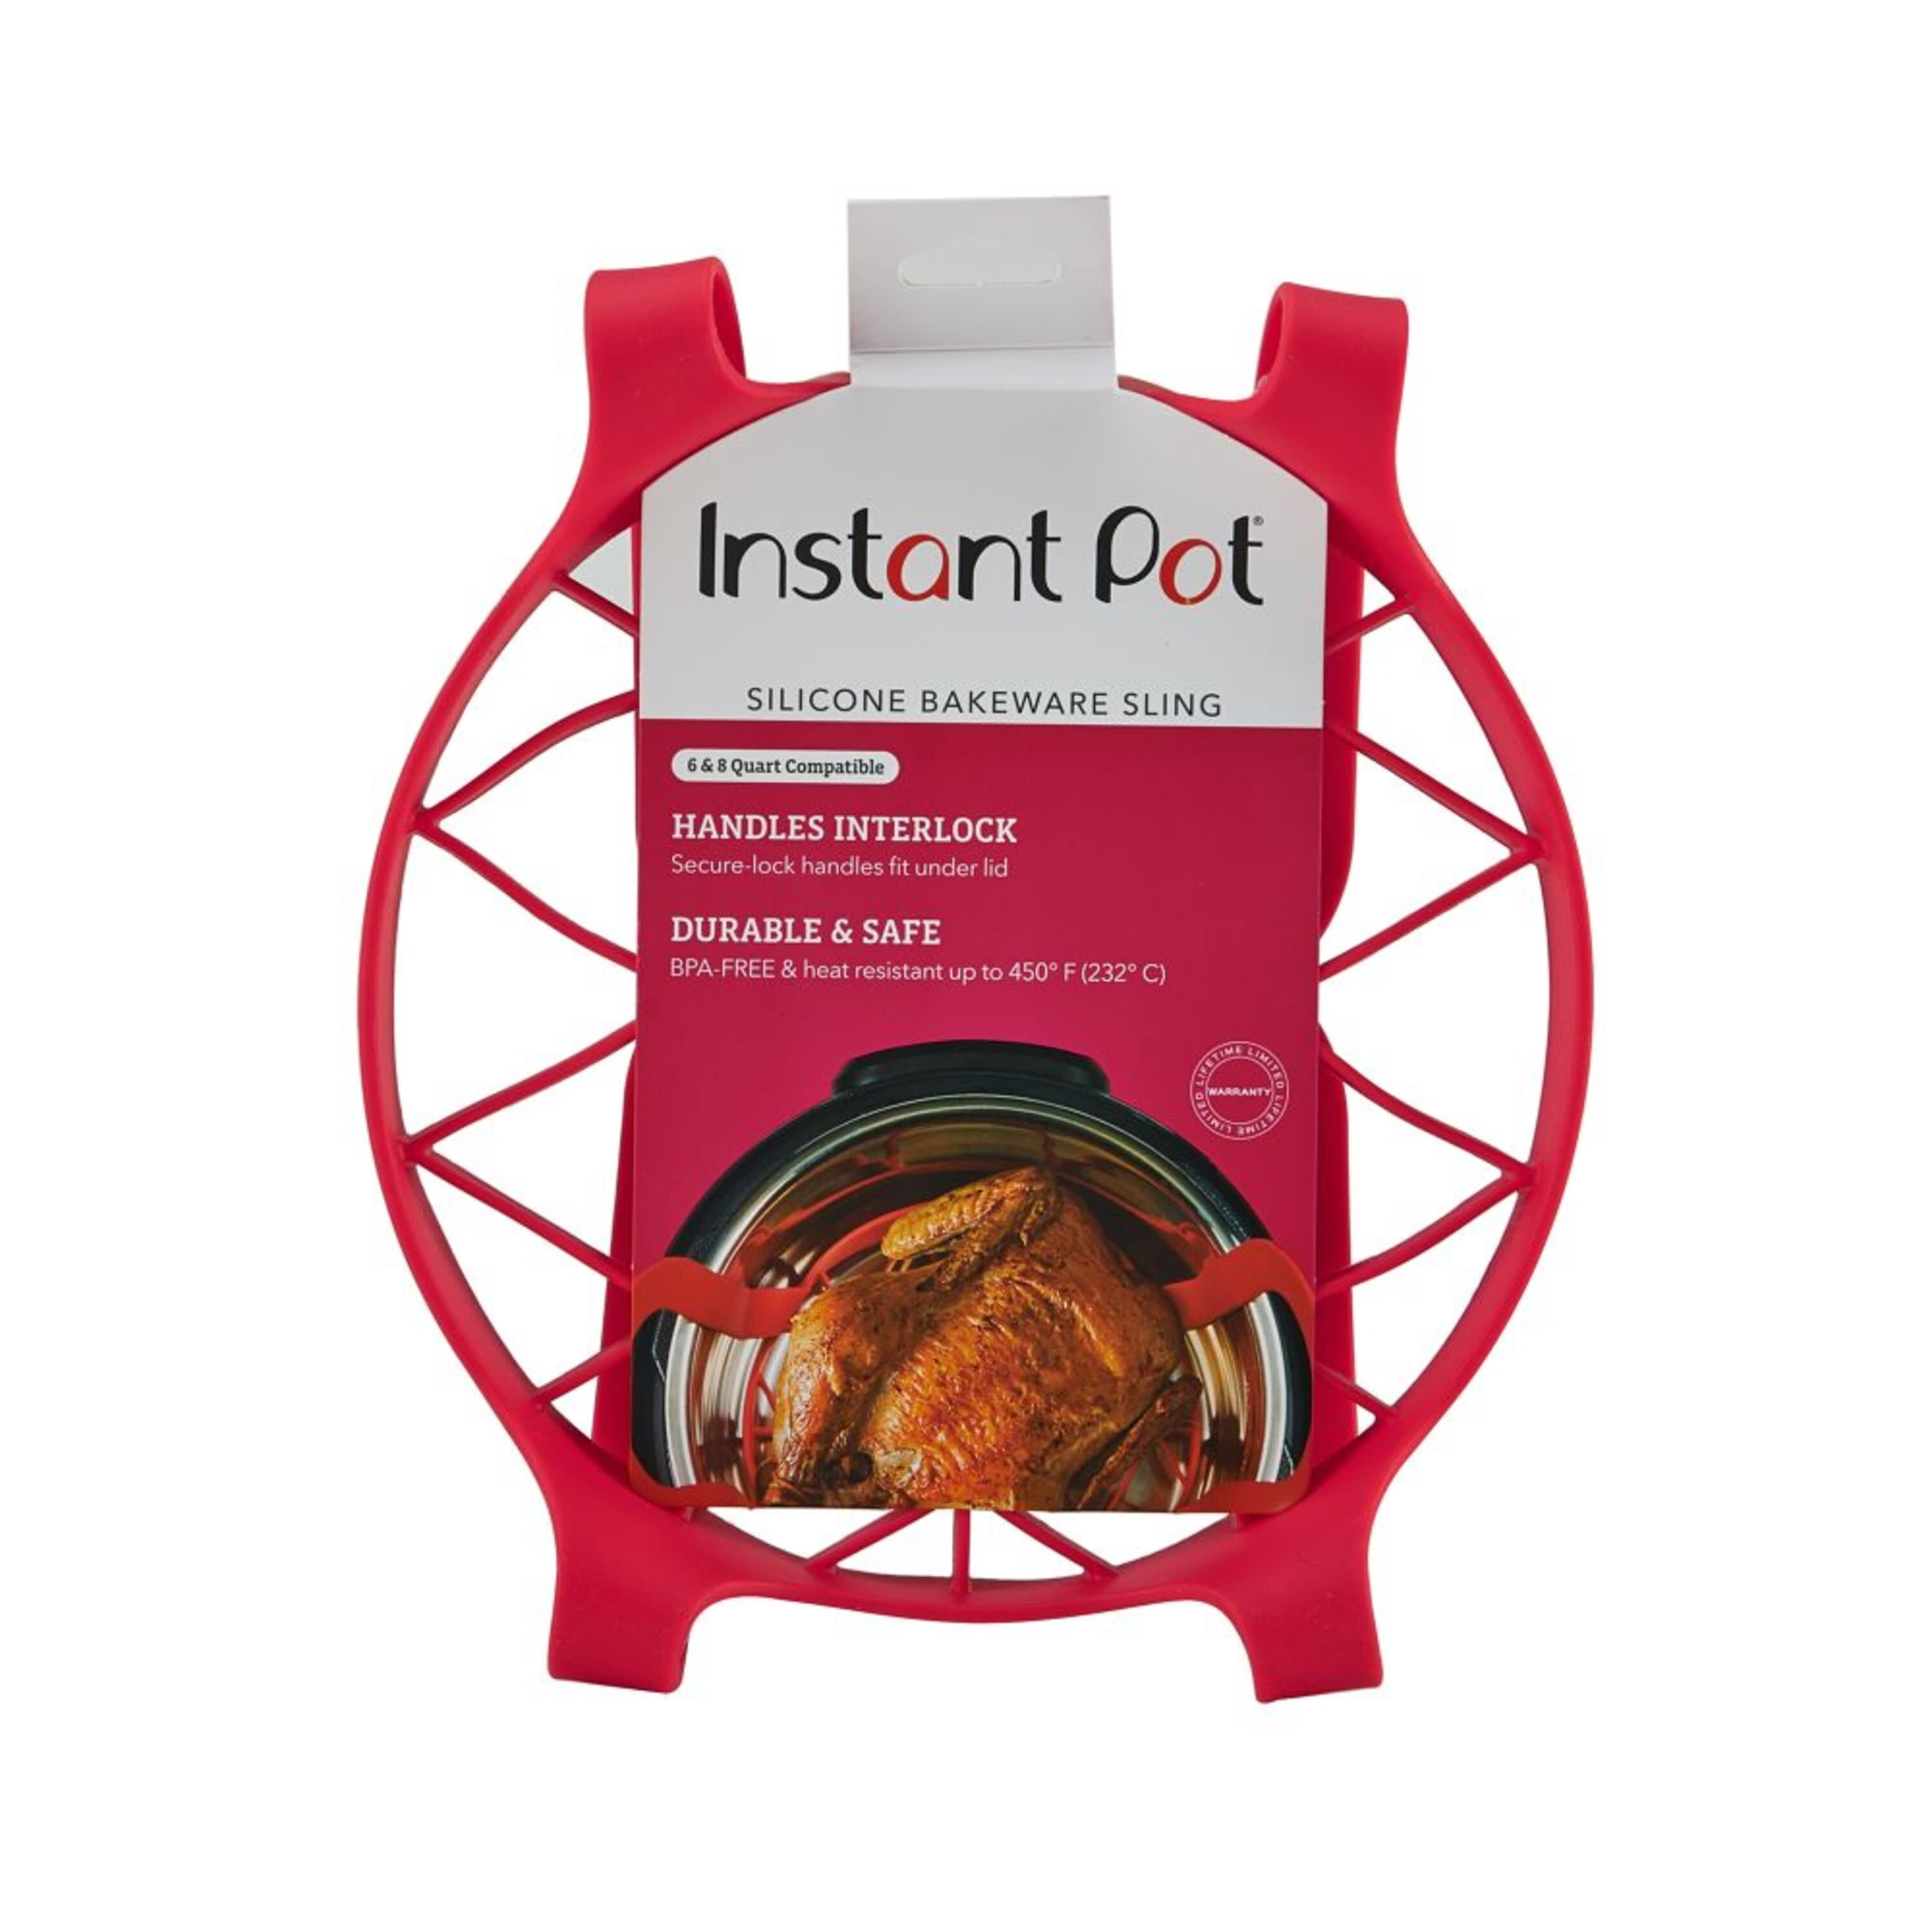 Instant Pot Official 8-piece Cook/Bake Set: 2 Pans, 2 Wire Racks, 2 Red  Silicone Lids, 1 Removable Divider, and Removable Base 